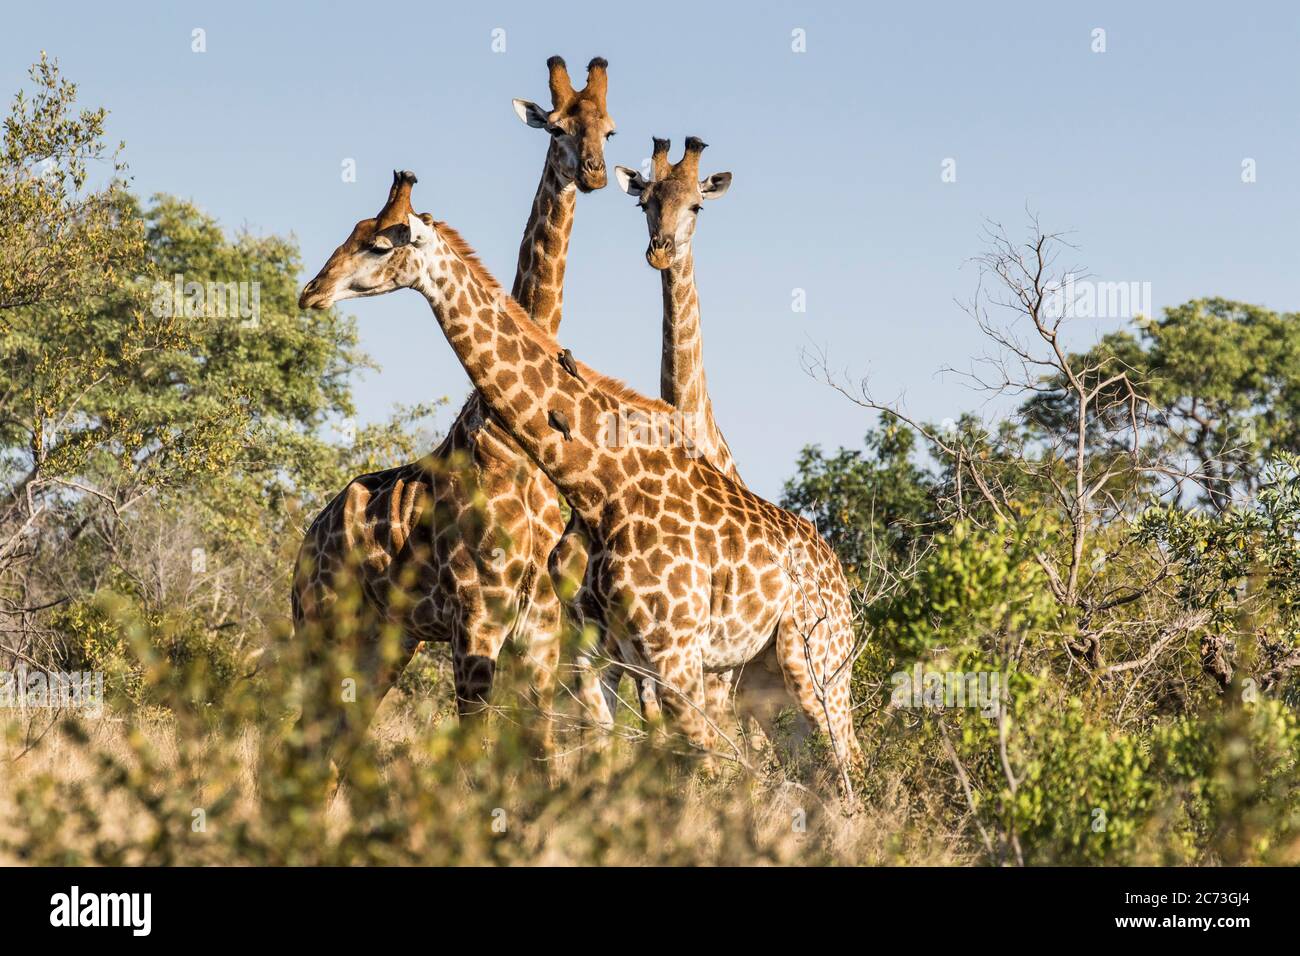 Giraffes standing at savanna, three long necks and faces lookout, Kruger National Park, Mpumalanga Province, South Africa, Stock Photo